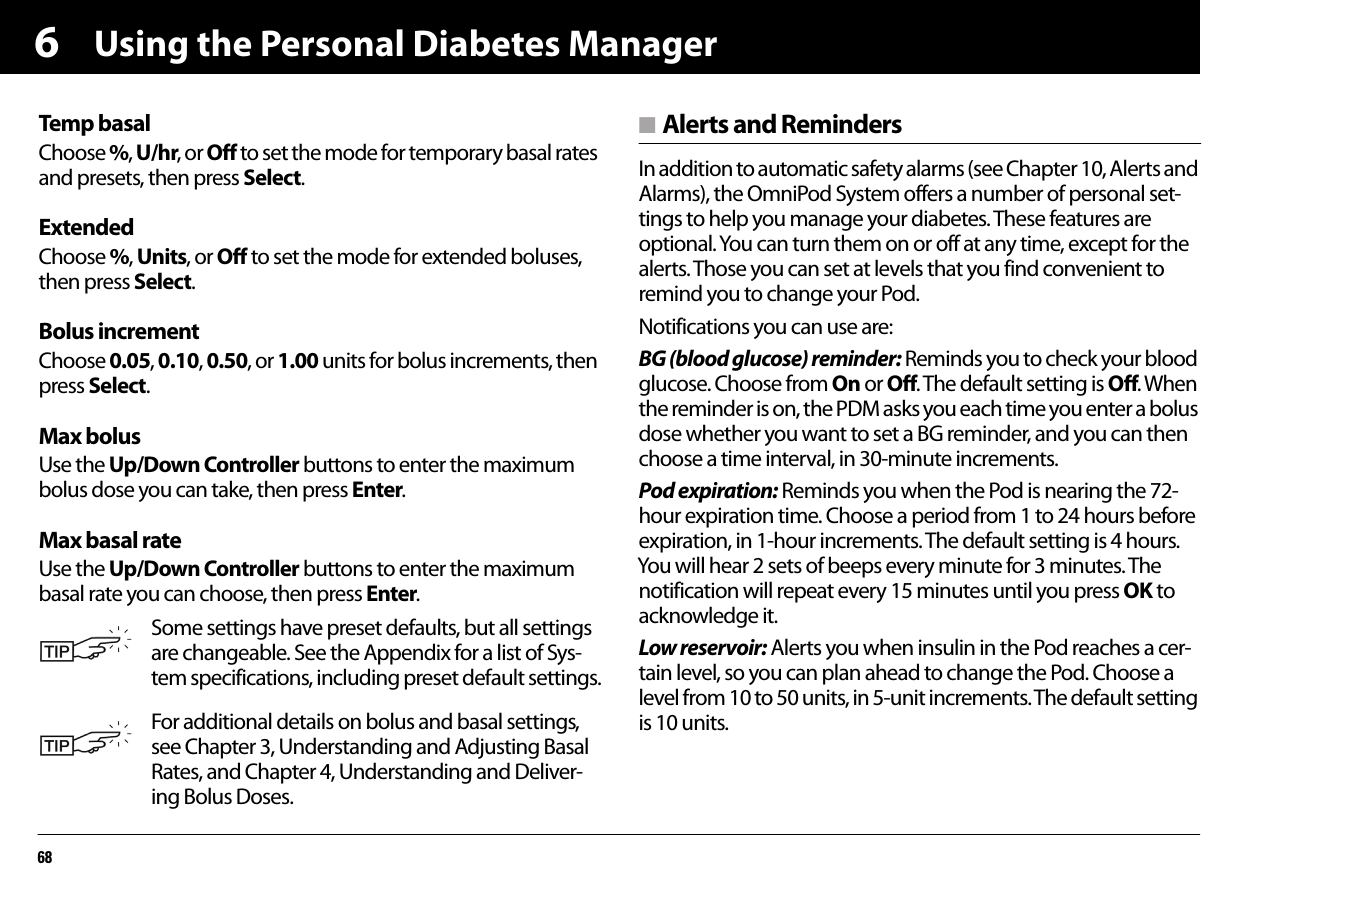 Using the Personal Diabetes Manager686Temp basalChoose %, U/hr, or Off to set the mode for temporary basal rates and presets, then press Select.ExtendedChoose %, Units, or Off to set the mode for extended boluses, then press Select.Bolus incrementChoose 0.05, 0.10, 0.50, or 1.00 units for bolus increments, then press Select.Max bolusUse the Up/Down Controller buttons to enter the maximum bolus dose you can take, then press Enter.Max basal rateUse the Up/Down Controller buttons to enter the maximum basal rate you can choose, then press Enter. n Alerts and RemindersIn addition to automatic safety alarms (see Chapter 10, Alerts and Alarms), the OmniPod System offers a number of personal set-tings to help you manage your diabetes. These features are optional. You can turn them on or off at any time, except for the alerts. Those you can set at levels that you find convenient to remind you to change your Pod. Notifications you can use are:BG (blood glucose) reminder: Reminds you to check your blood glucose. Choose from On or Off. The default setting is Off. When the reminder is on, the PDM asks you each time you enter a bolus dose whether you want to set a BG reminder, and you can then choose a time interval, in 30-minute increments.Pod expiration: Reminds you when the Pod is nearing the 72-hour expiration time. Choose a period from 1 to 24 hours before expiration, in 1-hour increments. The default setting is 4 hours. You will hear 2 sets of beeps every minute for 3 minutes. The notification will repeat every 15 minutes until you press OK to acknowledge it. Low reservoir: Alerts you when insulin in the Pod reaches a cer-tain level, so you can plan ahead to change the Pod. Choose a level from 10 to 50 units, in 5-unit increments. The default setting is 10 units.Some settings have preset defaults, but all settings are changeable. See the Appendix for a list of Sys-tem specifications, including preset default settings.For additional details on bolus and basal settings, see Chapter 3, Understanding and Adjusting Basal Rates, and Chapter 4, Understanding and Deliver-ing Bolus Doses.